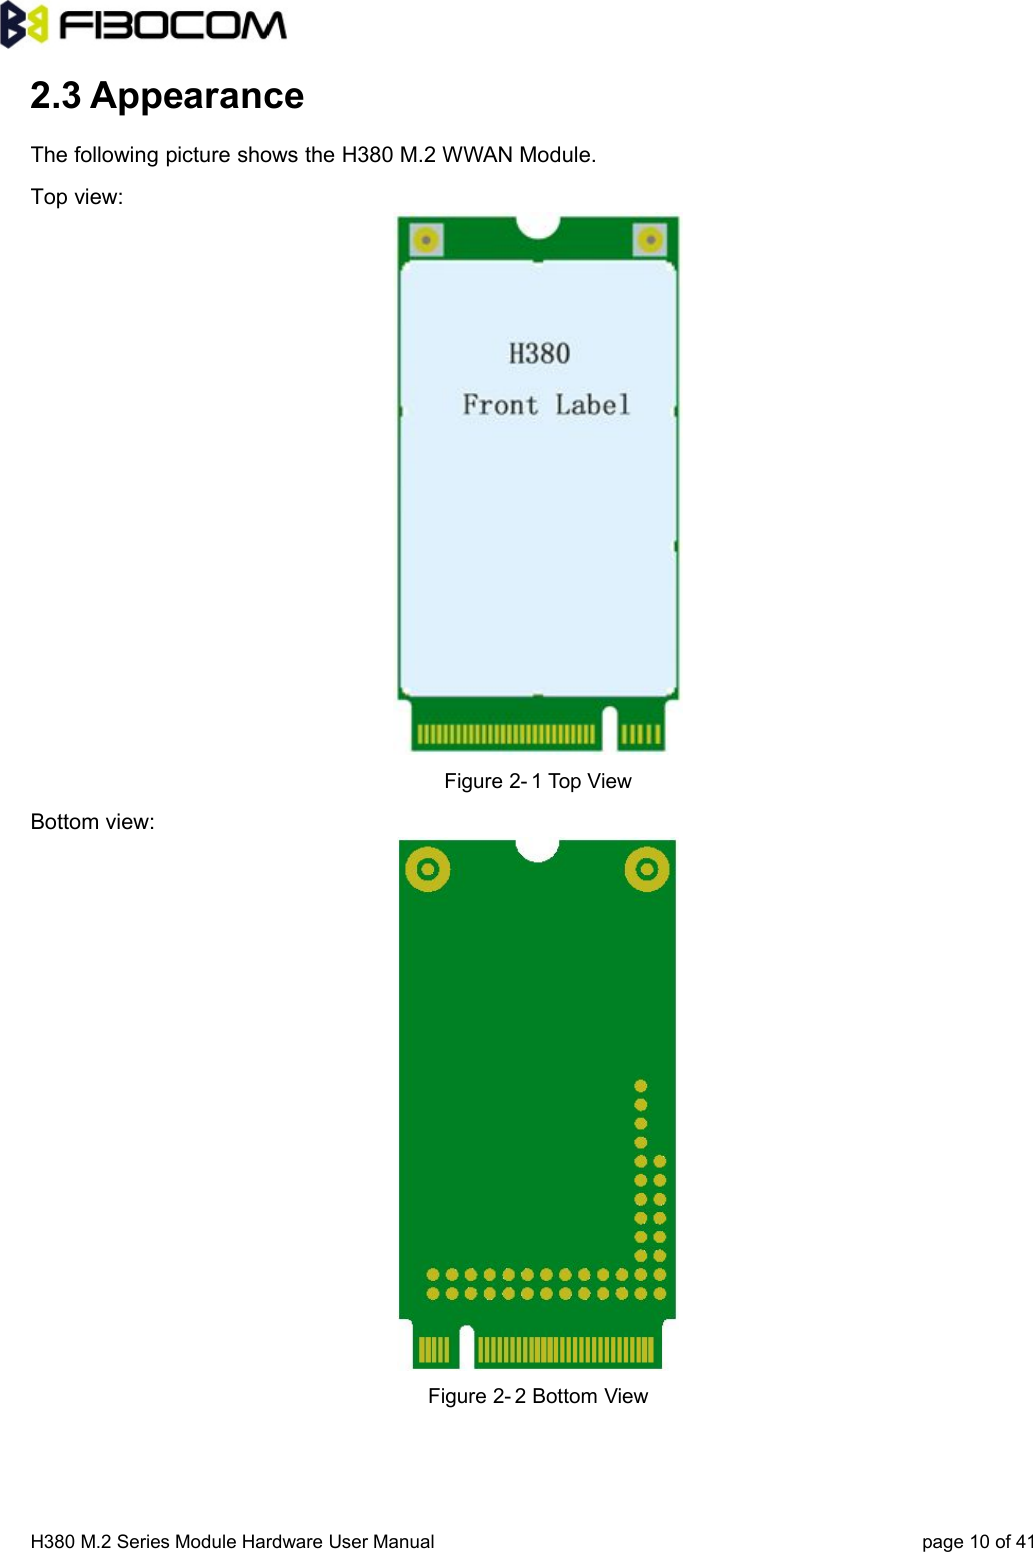 H380 M.2 Series Module Hardware User Manual page 10 of 412.3 AppearanceThe following picture shows the H380 M.2 WWAN Module.Top view:Figure 2- 1 Top ViewBottom view:Figure 2- 2 Bottom View